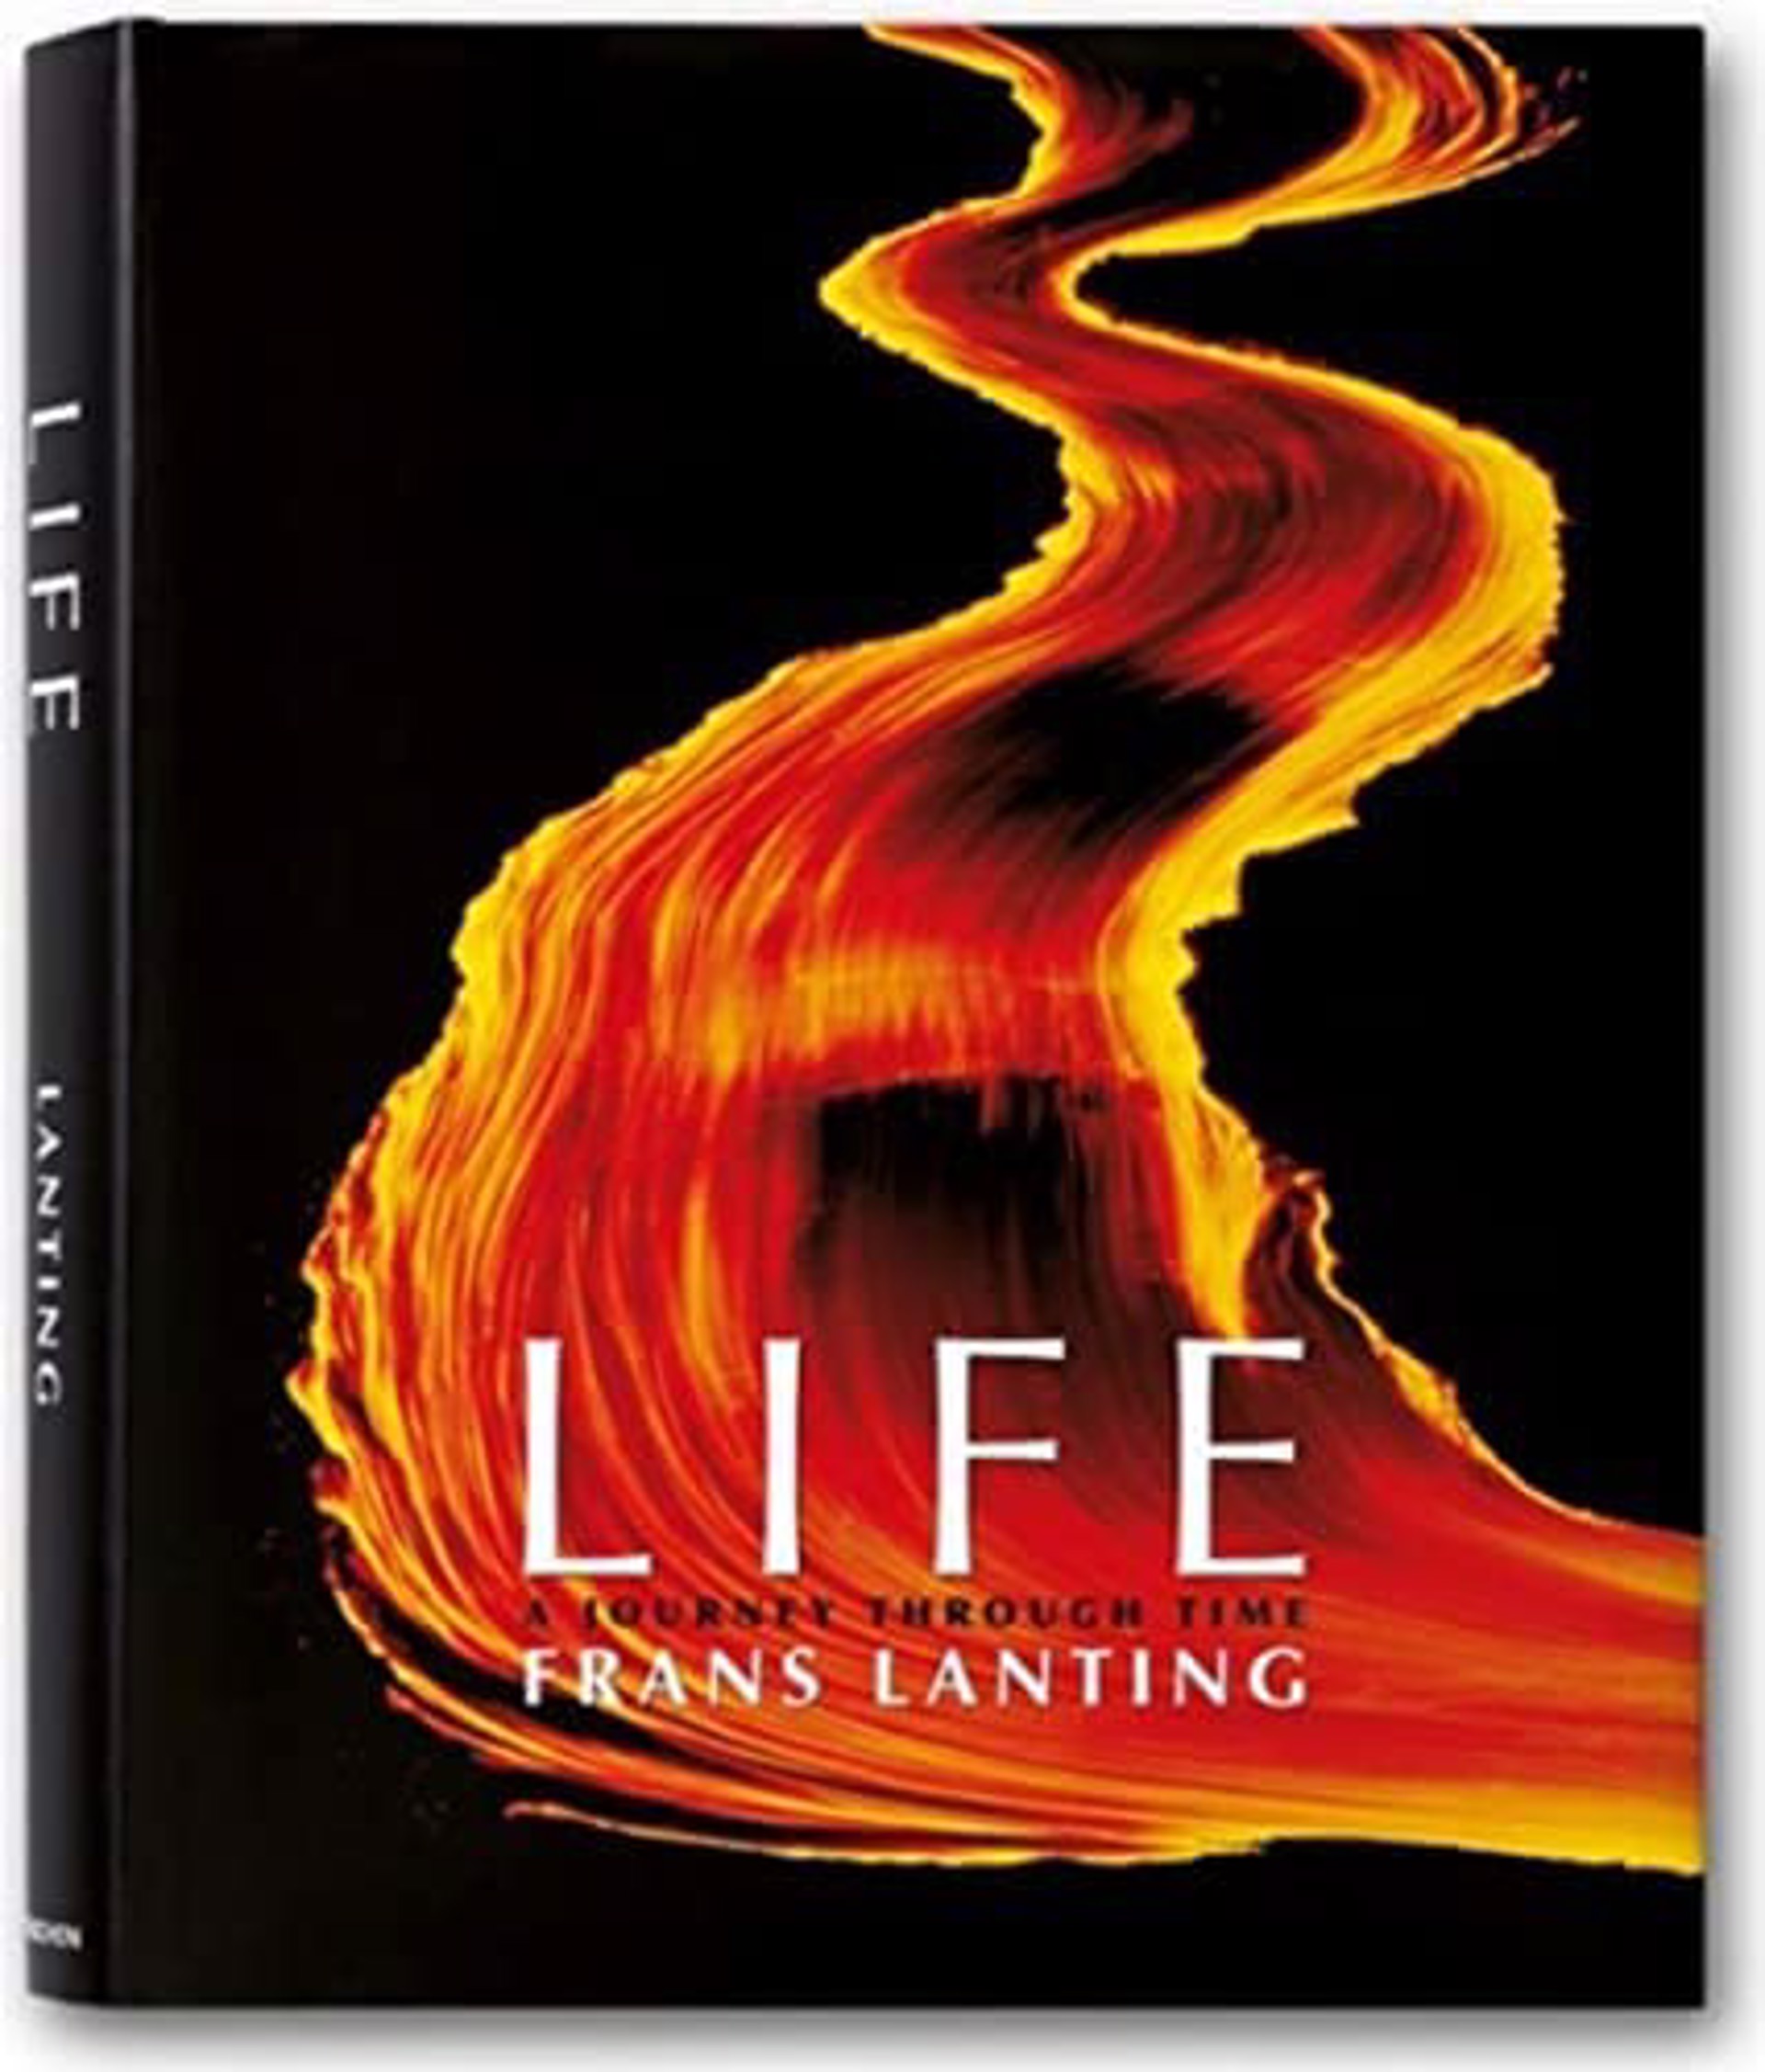 Life: A Journey Through Time by Frans Lanting